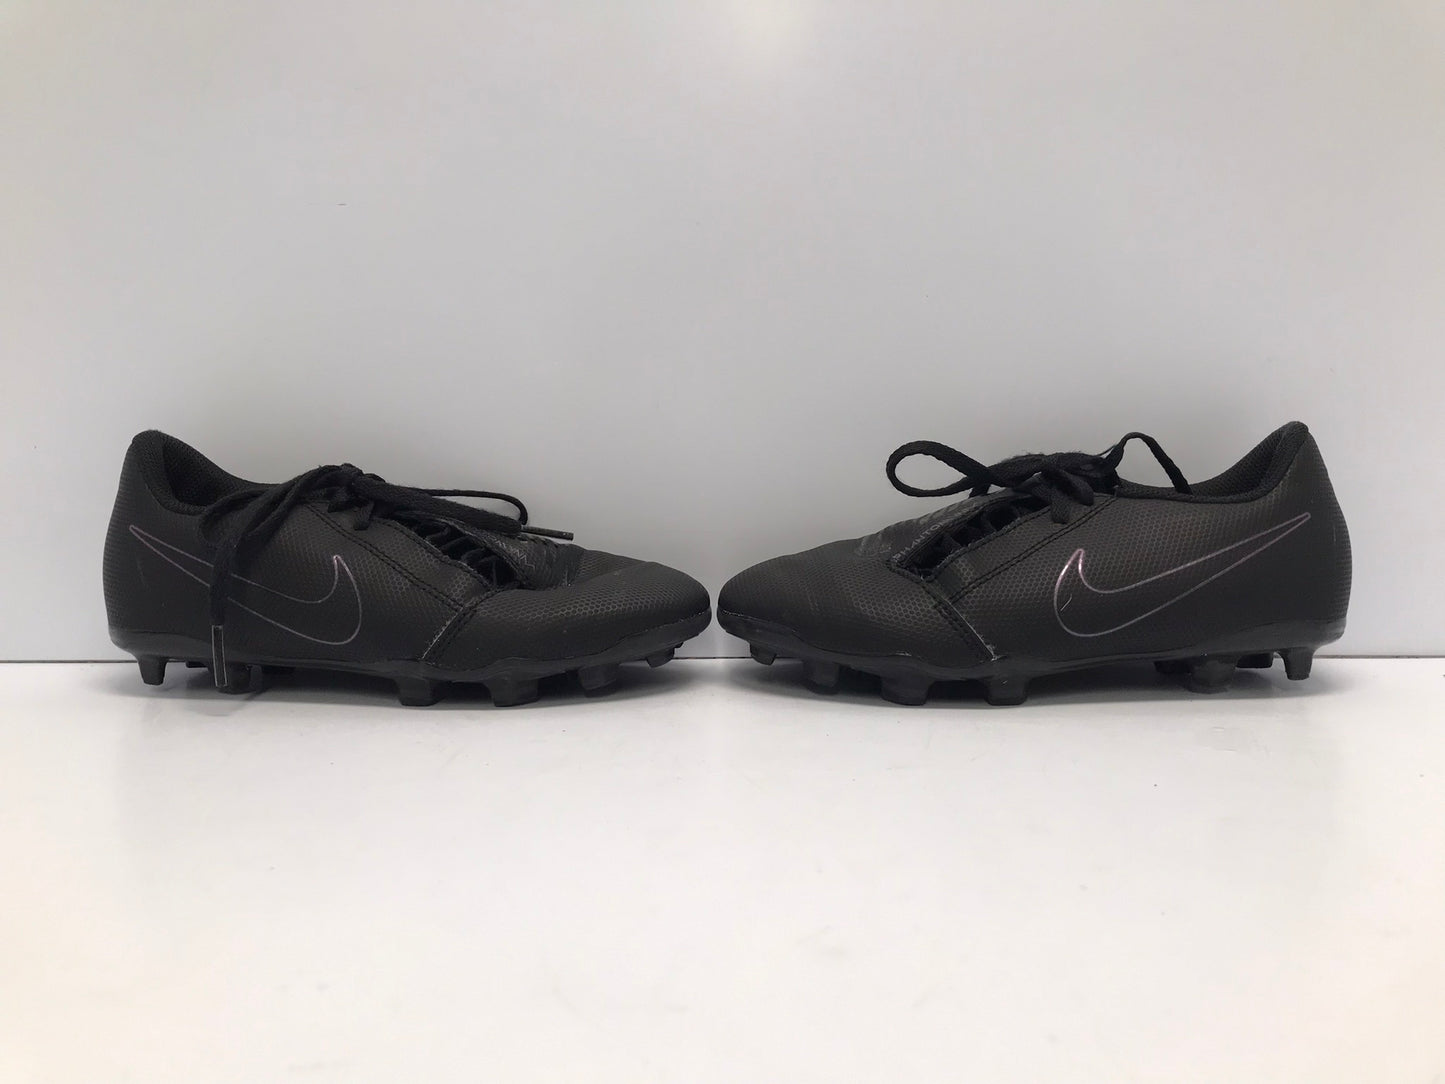 Soccer Shoes Cleats Child Size 2 Nike Phantom Black Purple Outstanding Quality